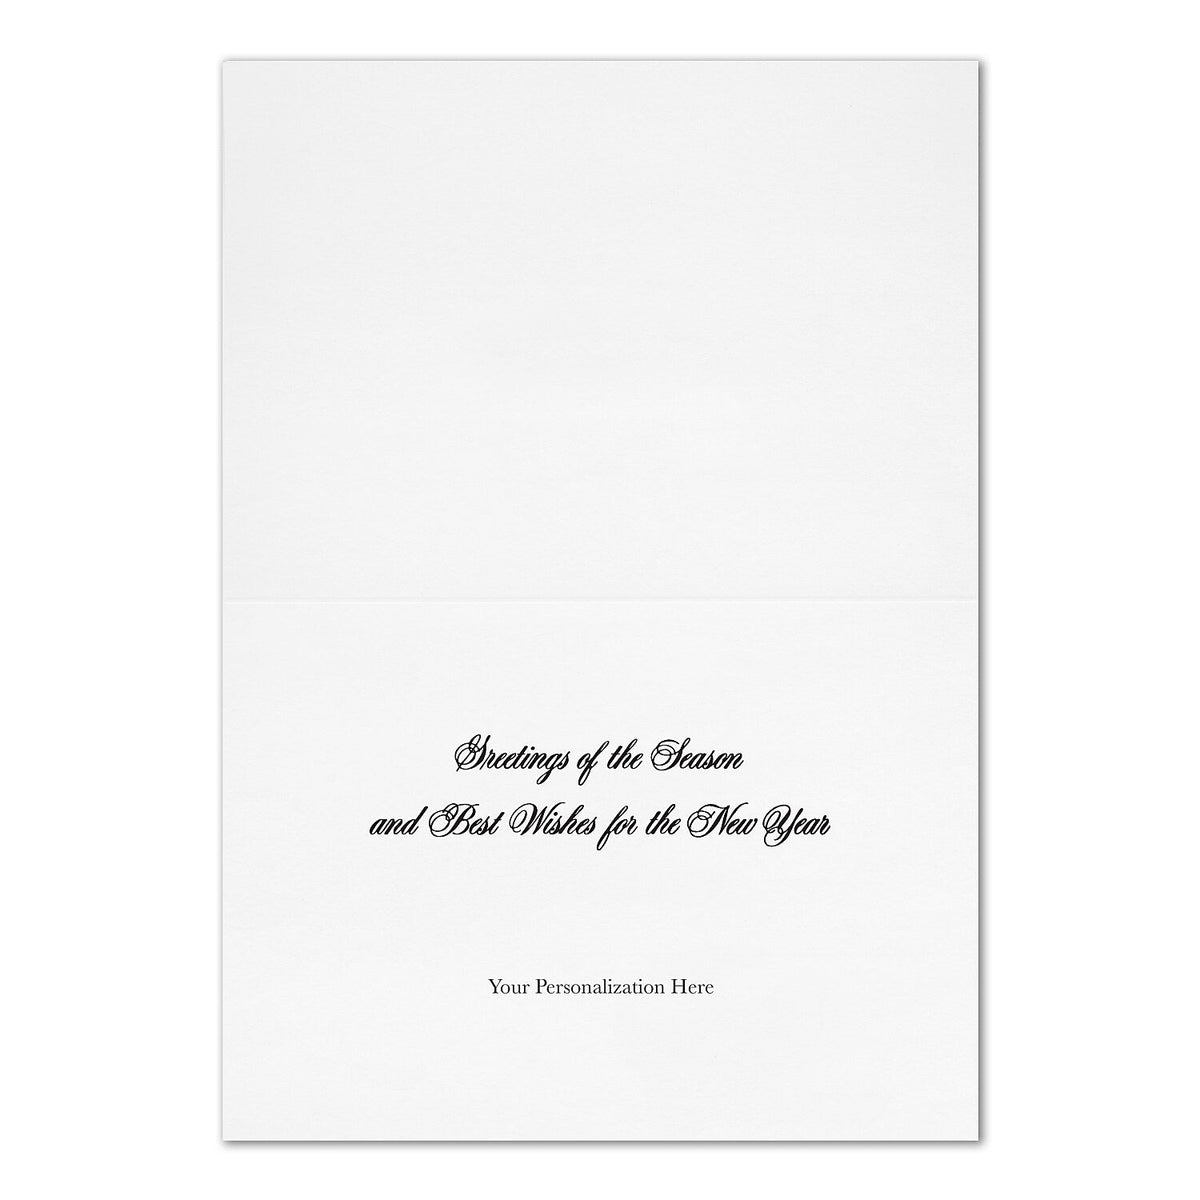 "Elegant Image" Holiday Card w/ Fastick Silver Lined White Envelope, 50/BX